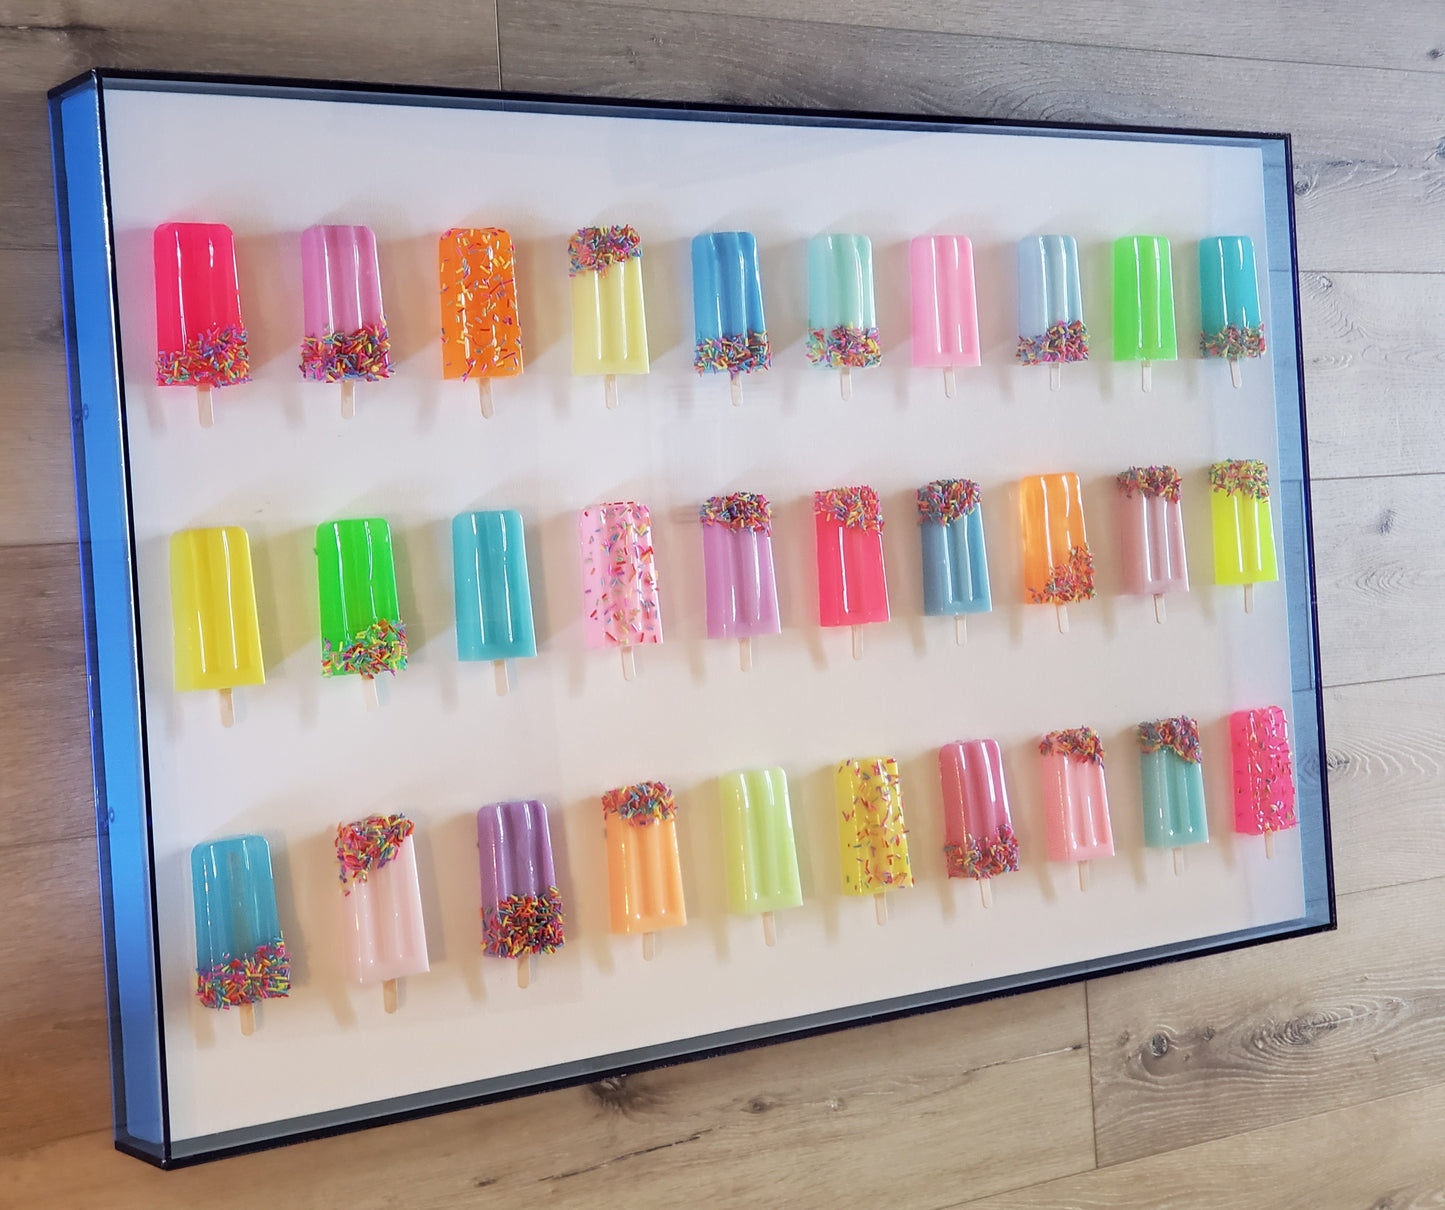 Pop Art Popsicle Wall Hanging, 30 Popsicle Sculptures, Open Frame